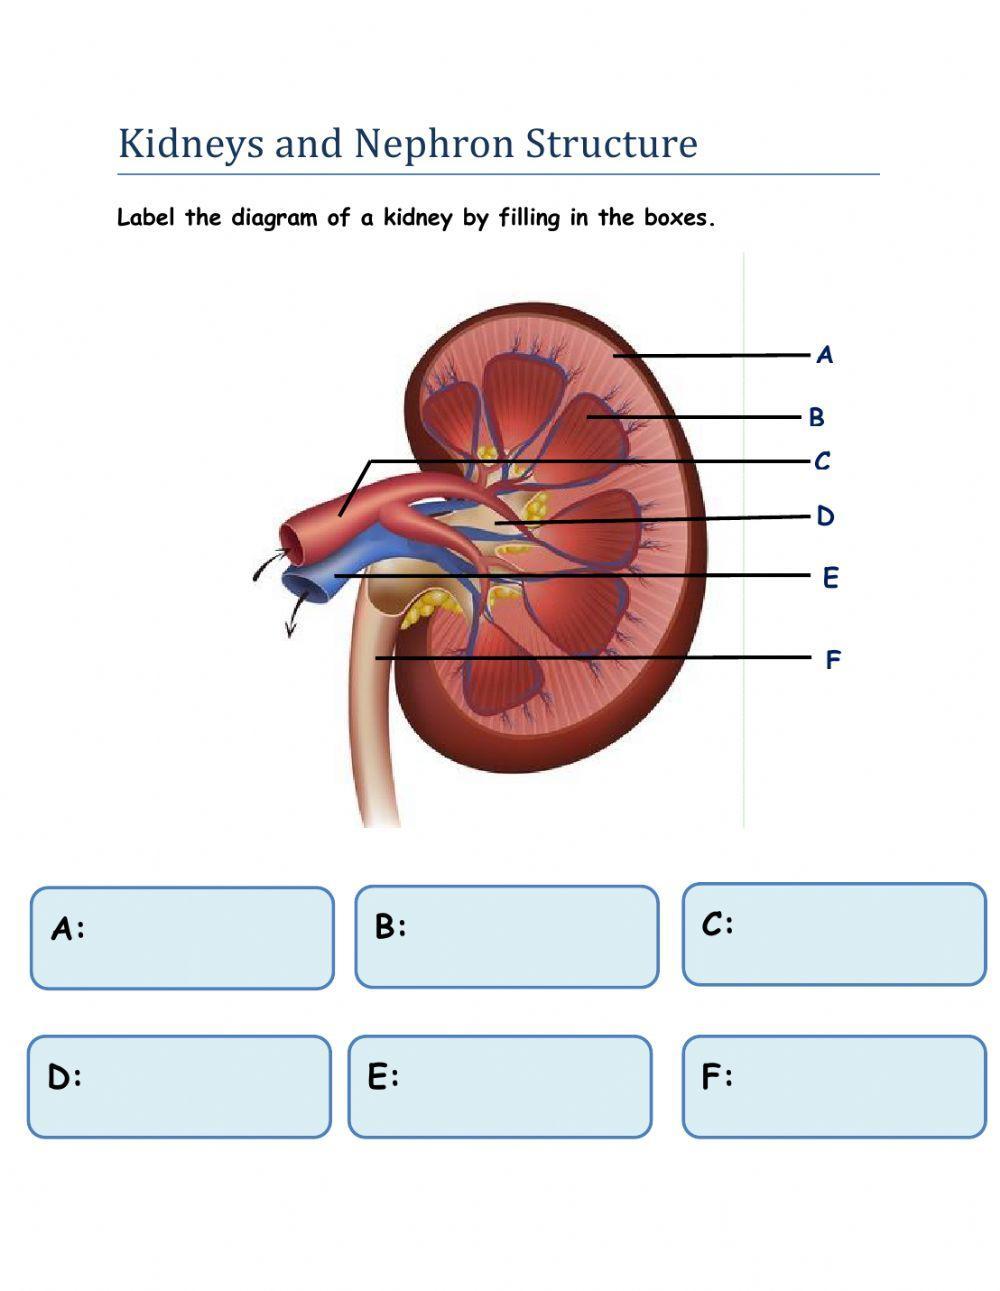 Kidney and Nephron Structure